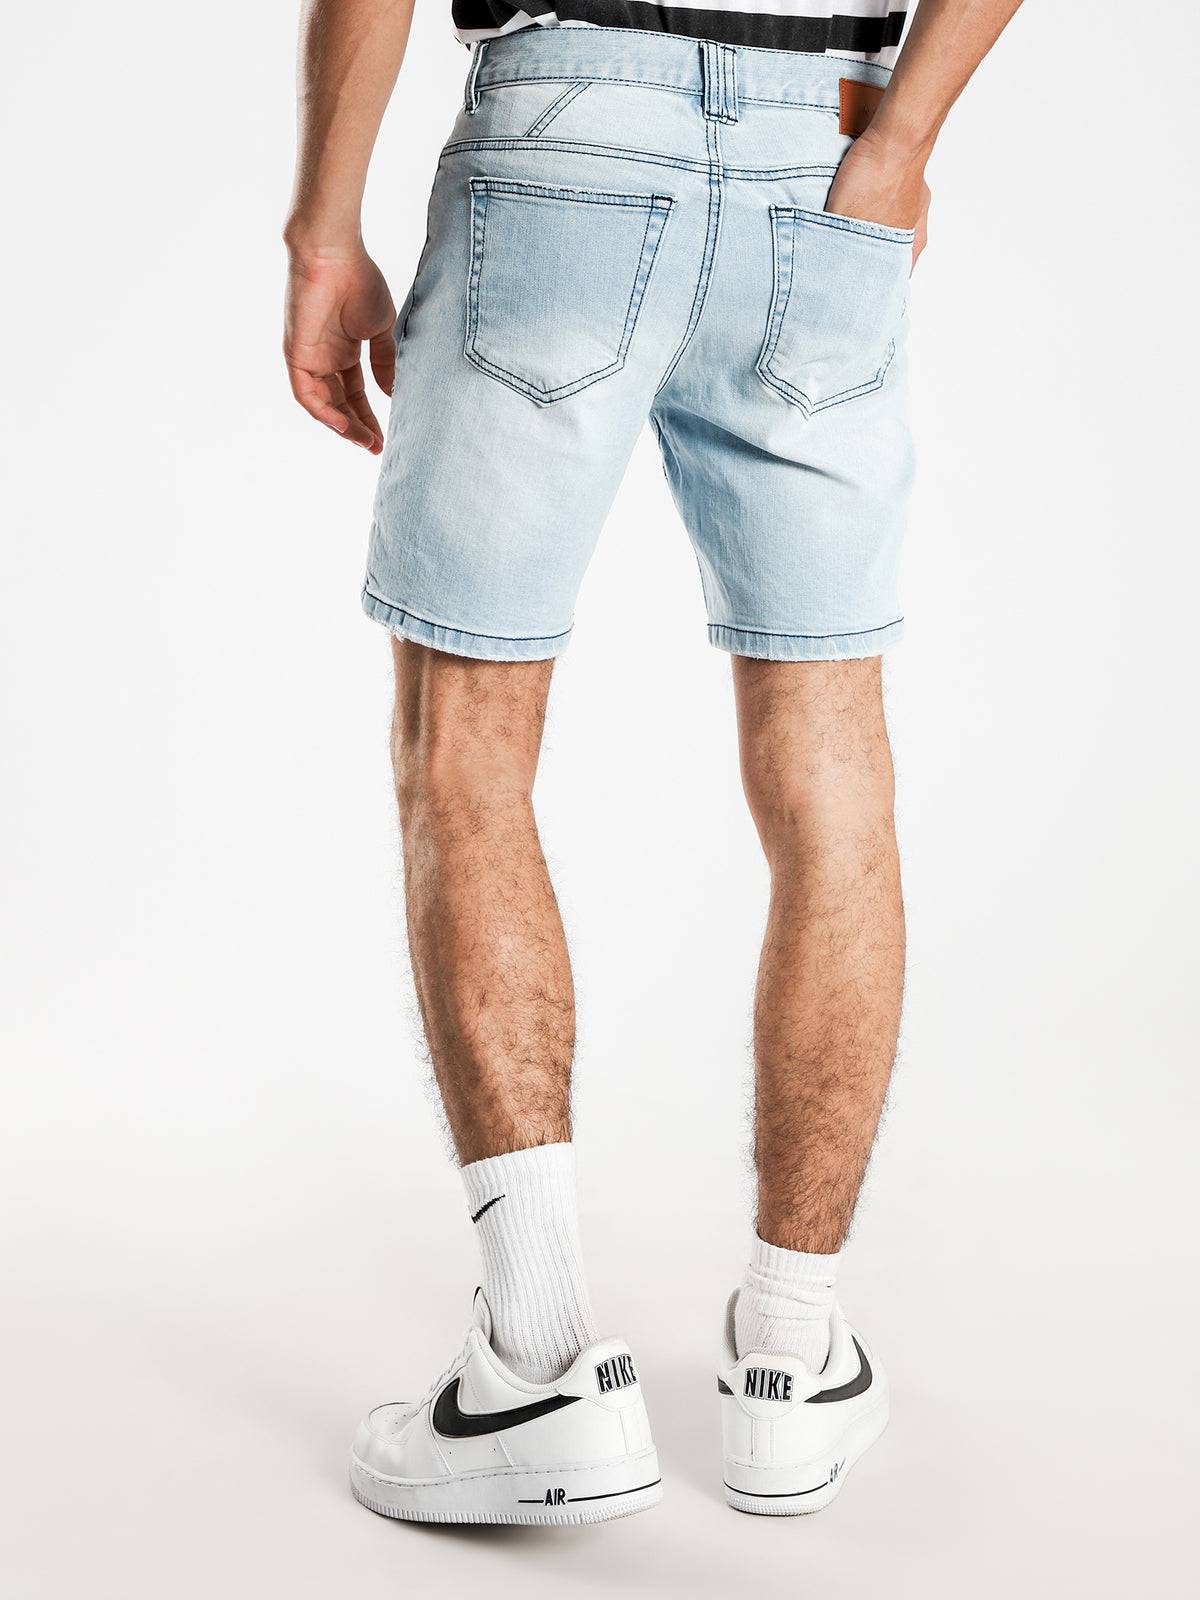 Combination Shorts in Indianapolis Blue Denim